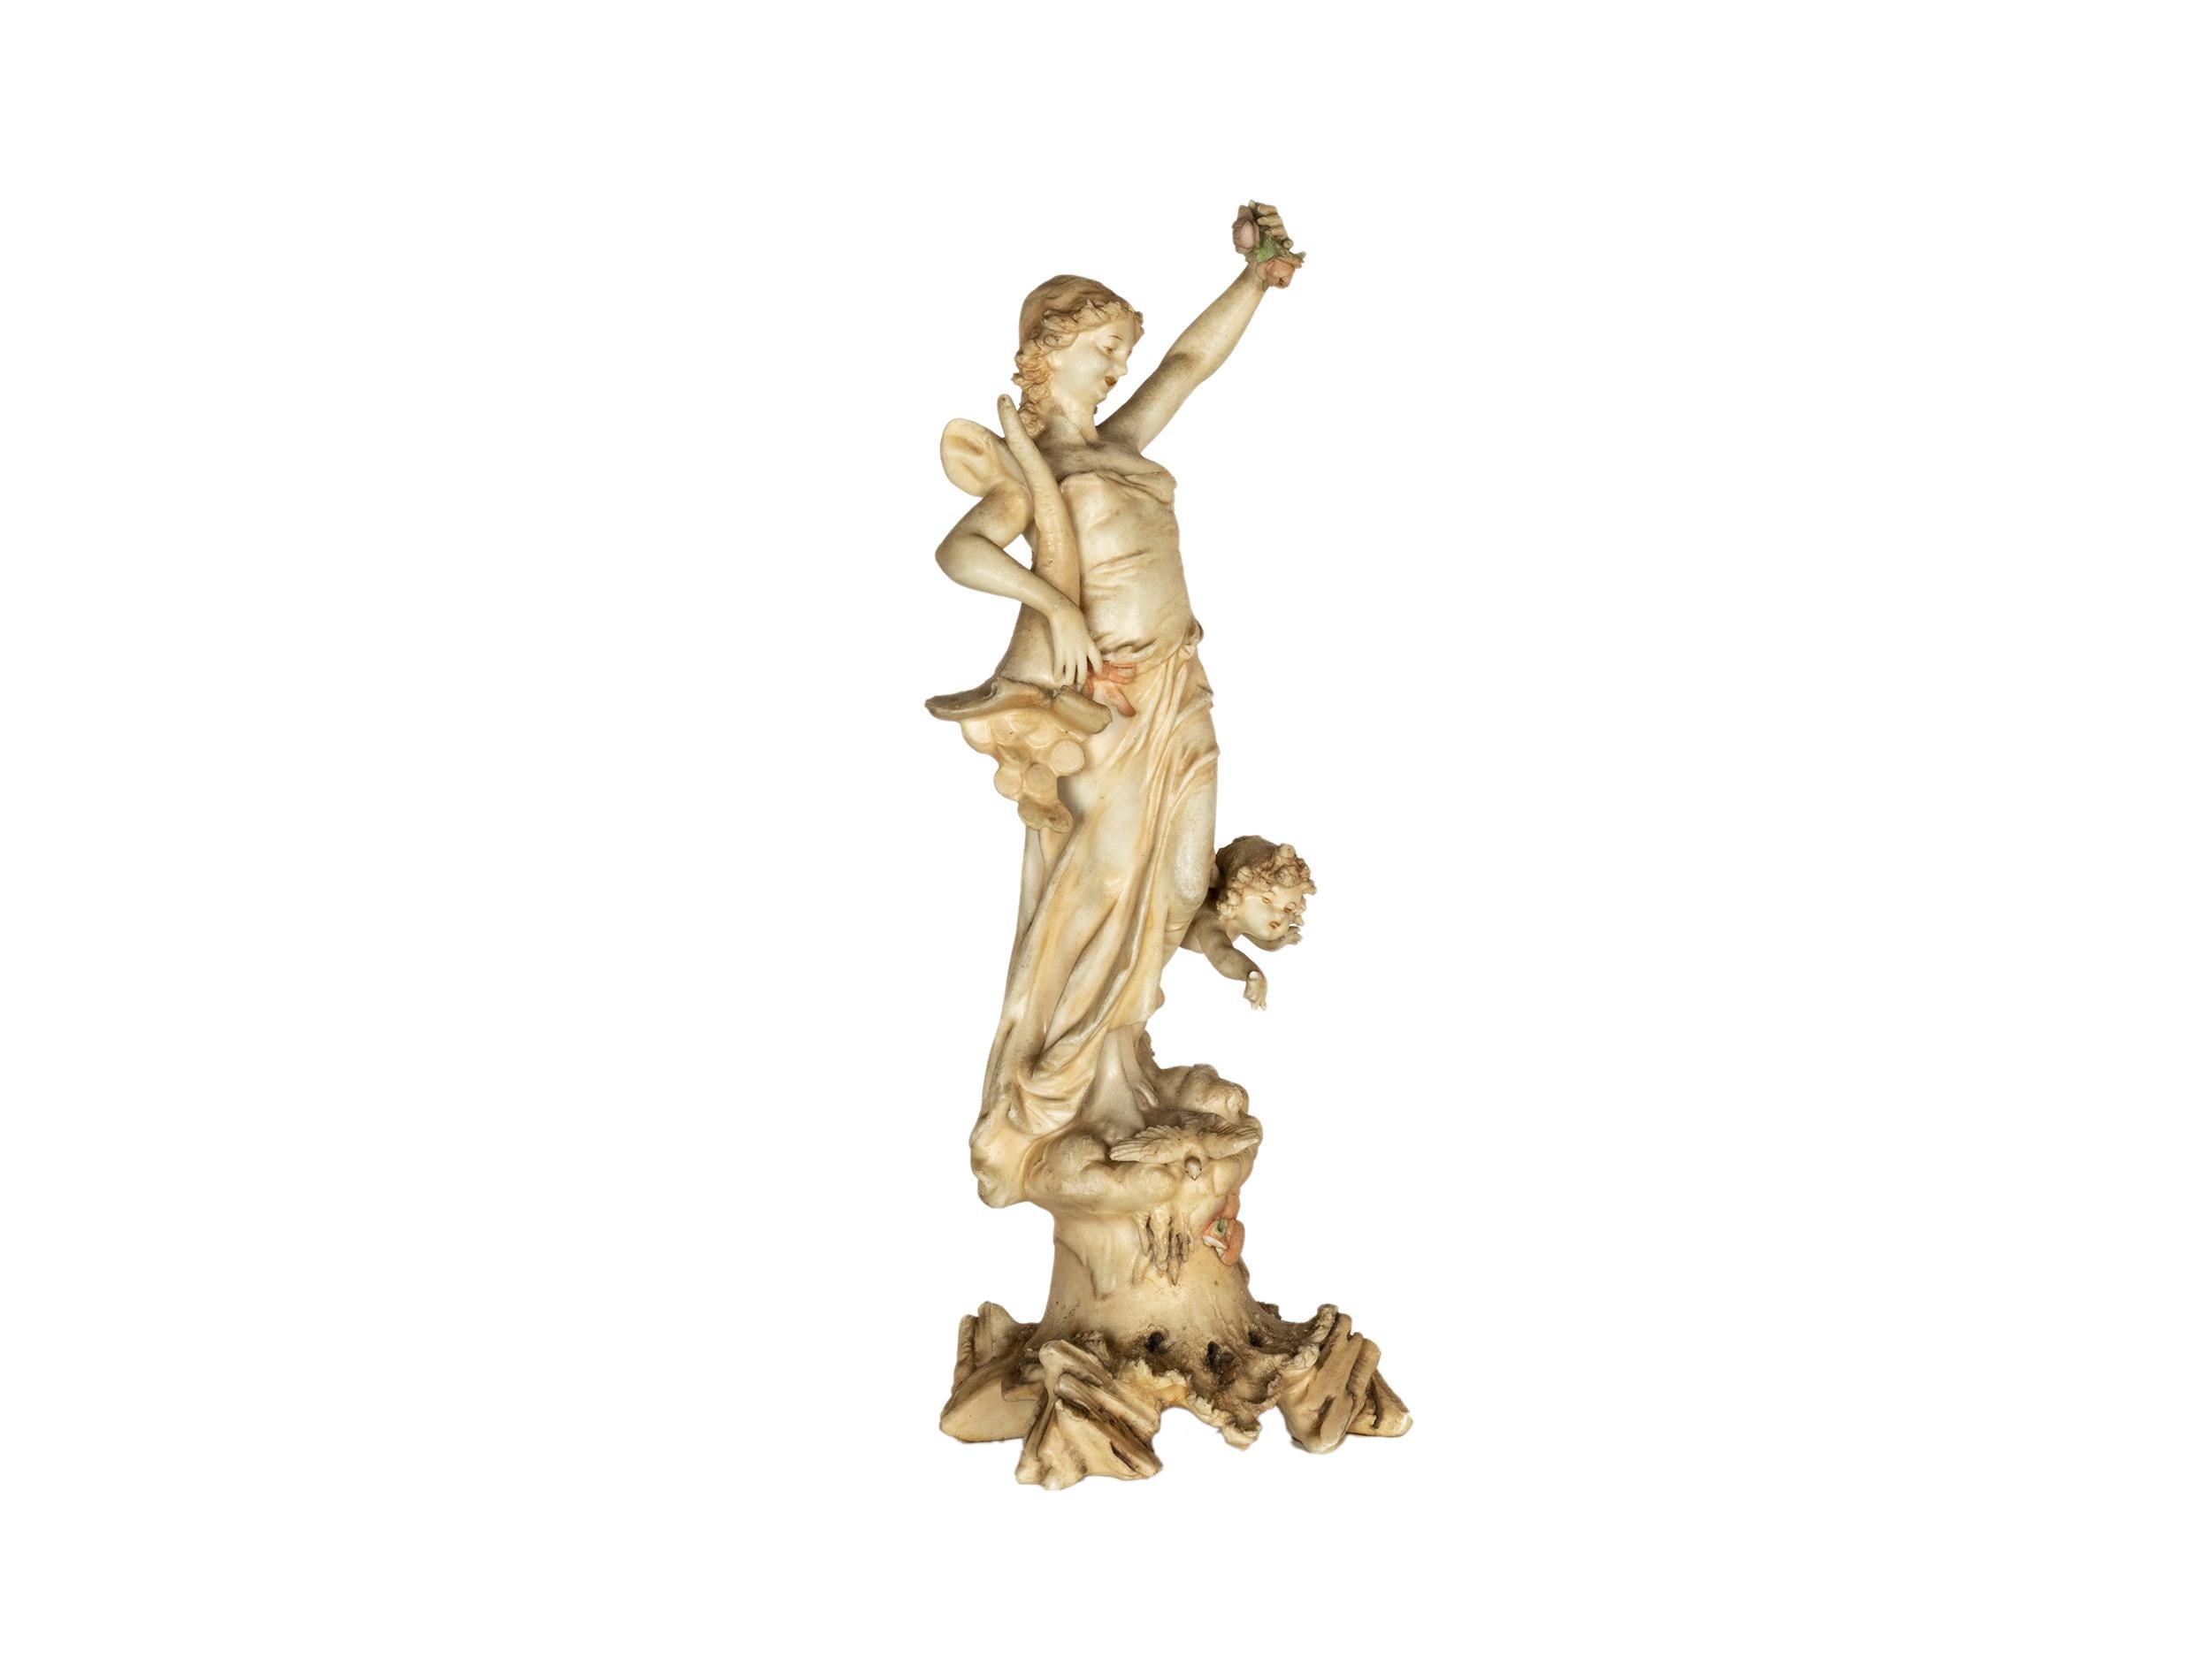 An Art Nouveau stunning French porcelain statue of the goddess of Fortune, Tyche, depicting the goddess holding a cornucopia overflowing with gold coins, surrounded by a cherubim and a peaceful dove, a symbol of good fortune and prosperity.
